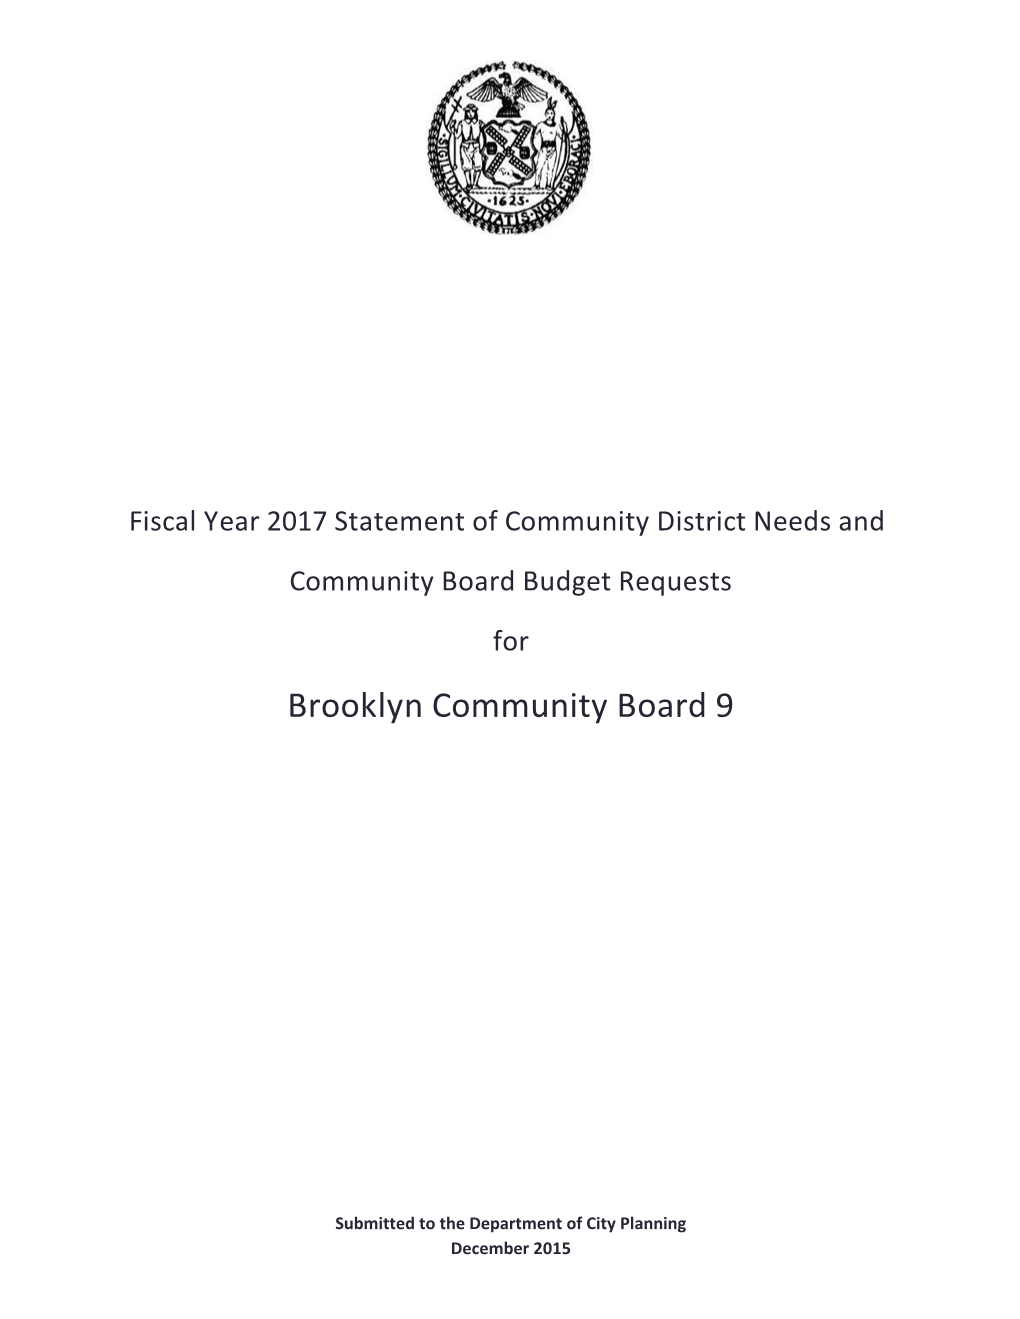 Fiscal Year 2017 Statement of Community District Needs and Community Board Budget Requests